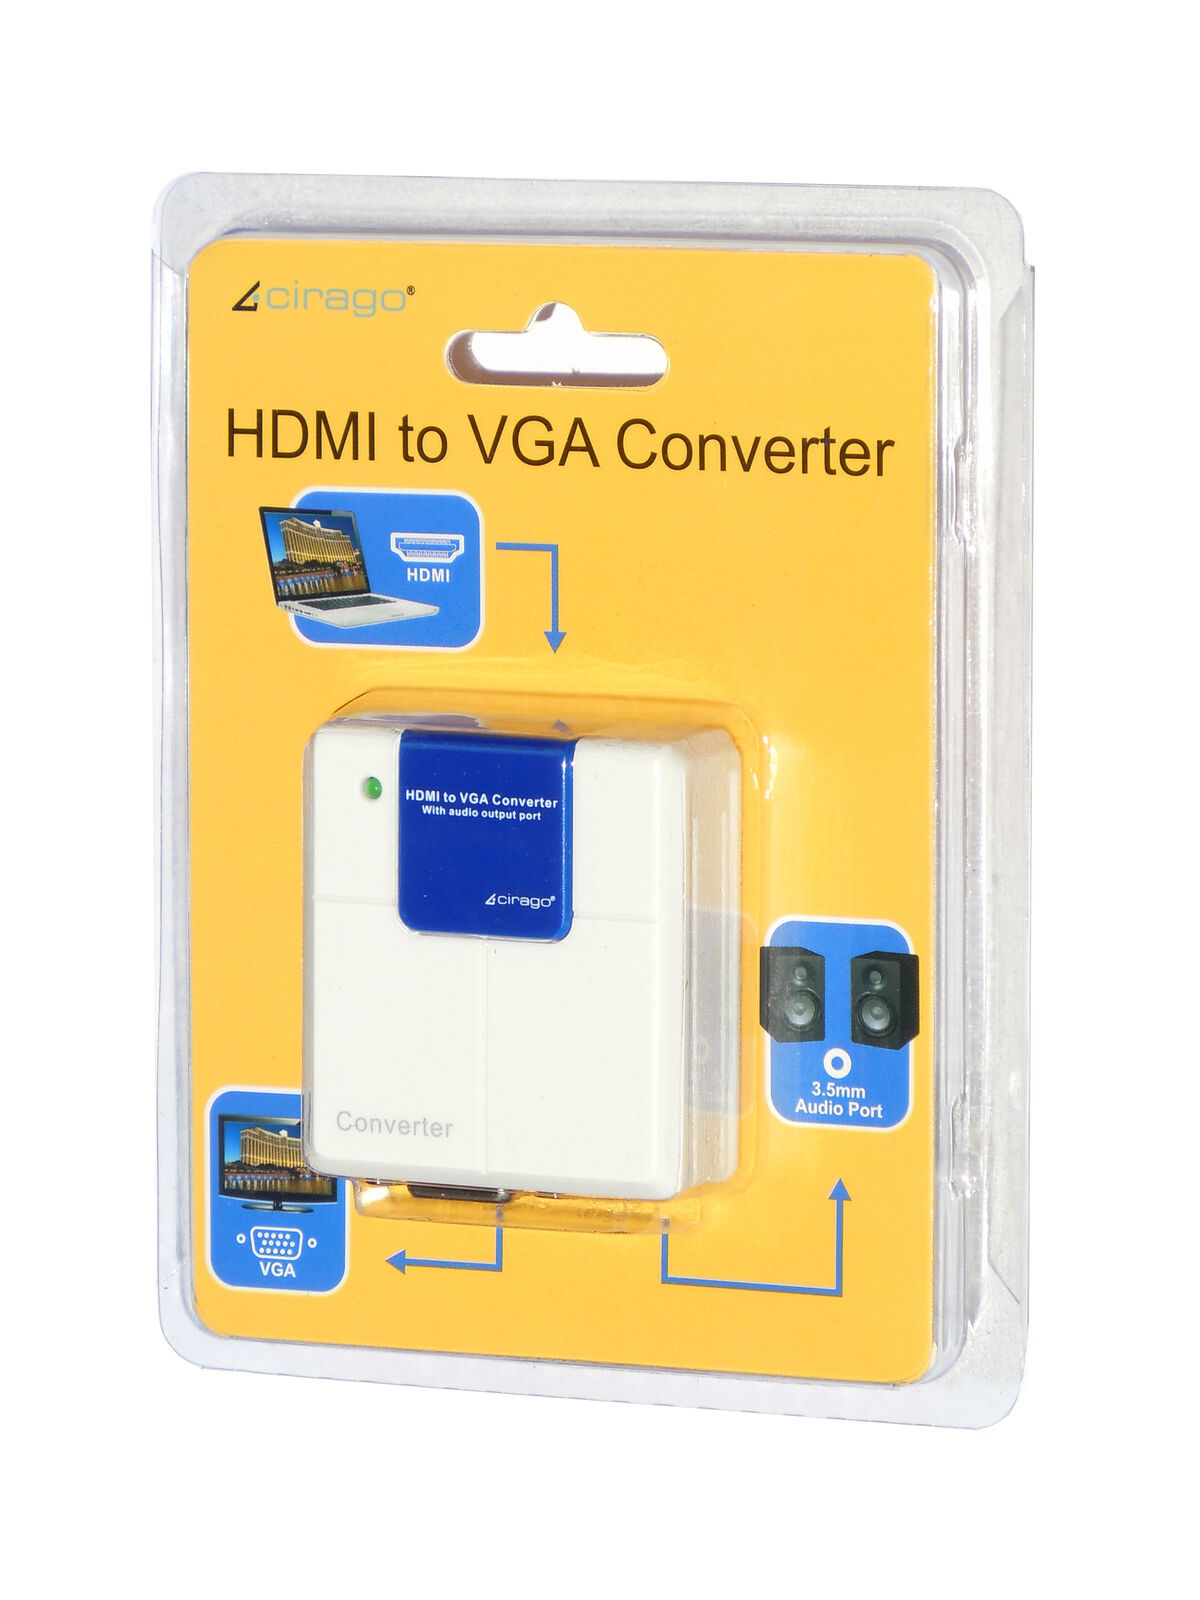 Cirago HDMI to VGA Converter Display Adapter 1080i with 3.5mm Audio Output White